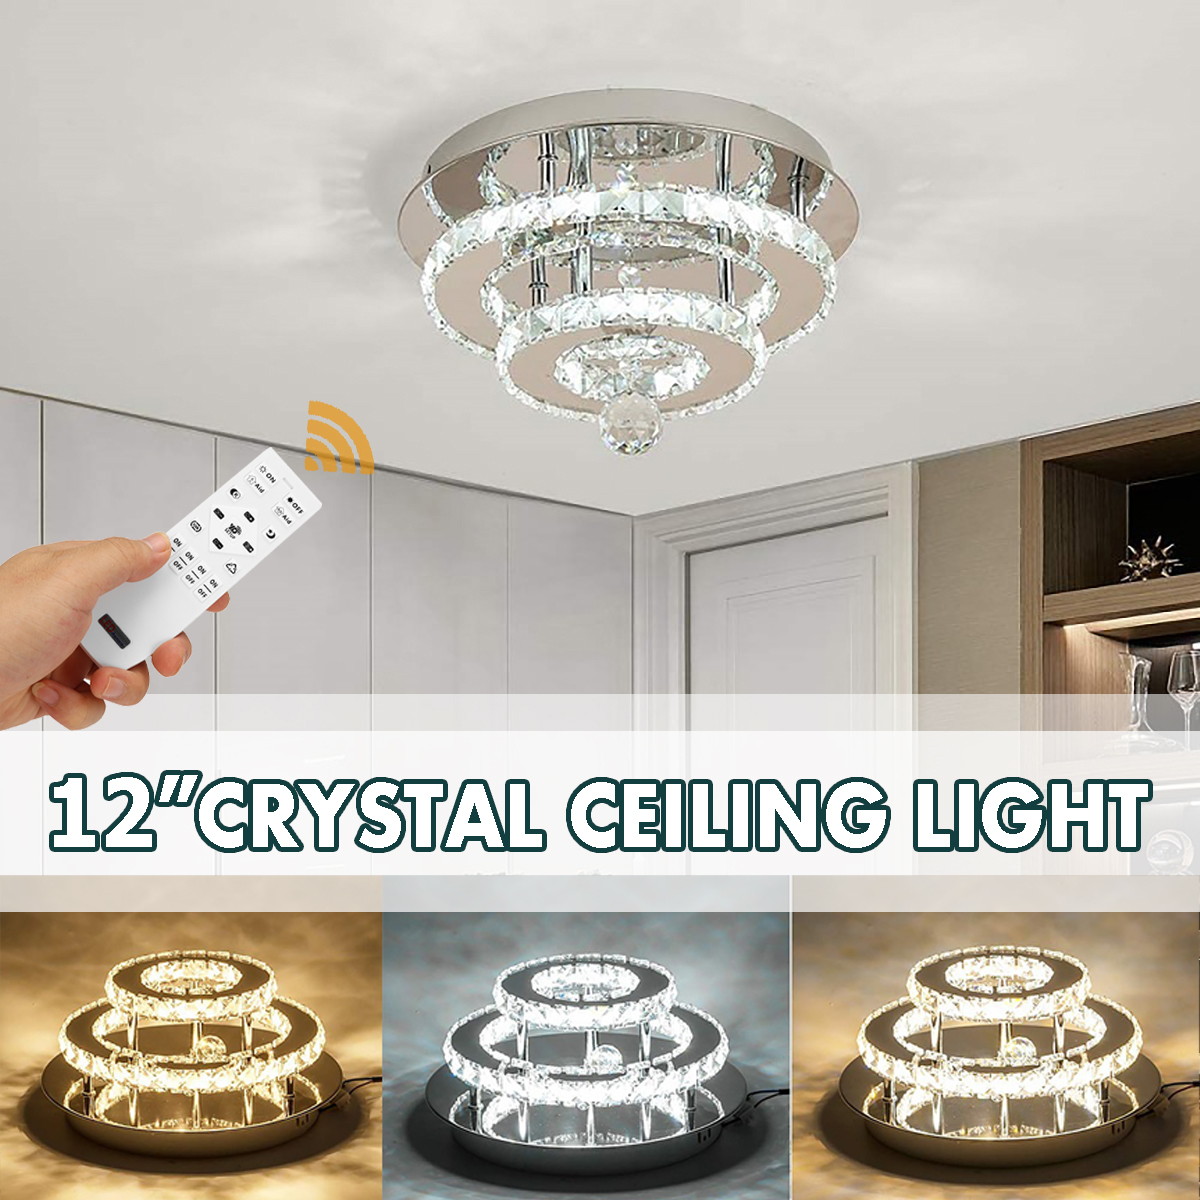 SINGES 2 Rings Modern Crystal Ceiling Light Flush Mounted, 12 inch LED Chandelier Pendant Linghting Fixtures Home Decor - image 1 of 6